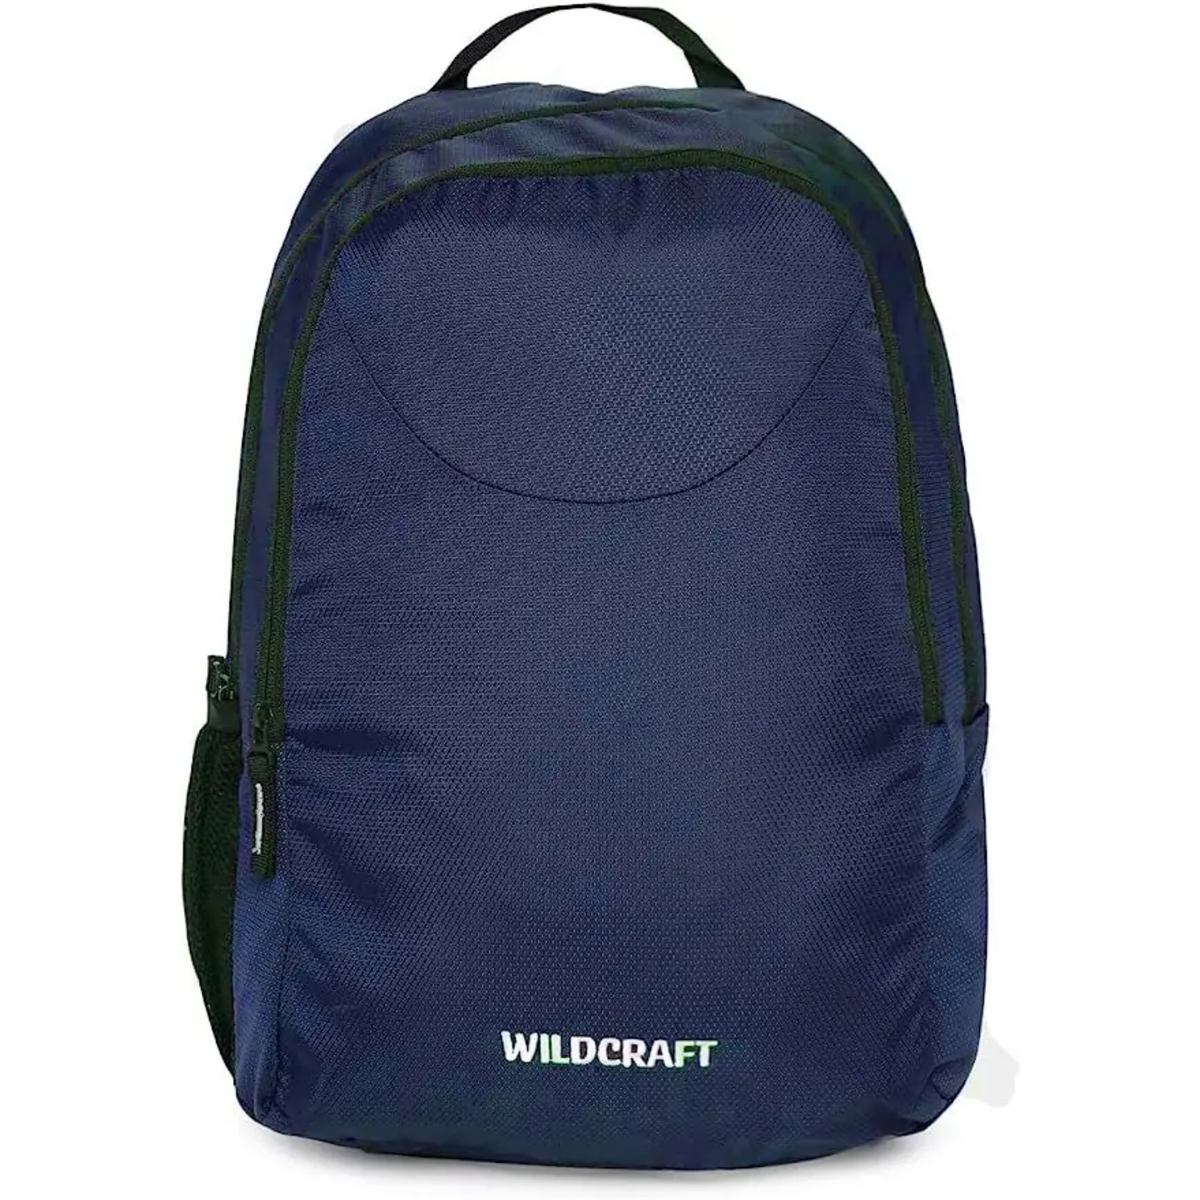 Wildcraft Boost1 Laptop Backpack, 18.5 Inches, Blue, WC-187394